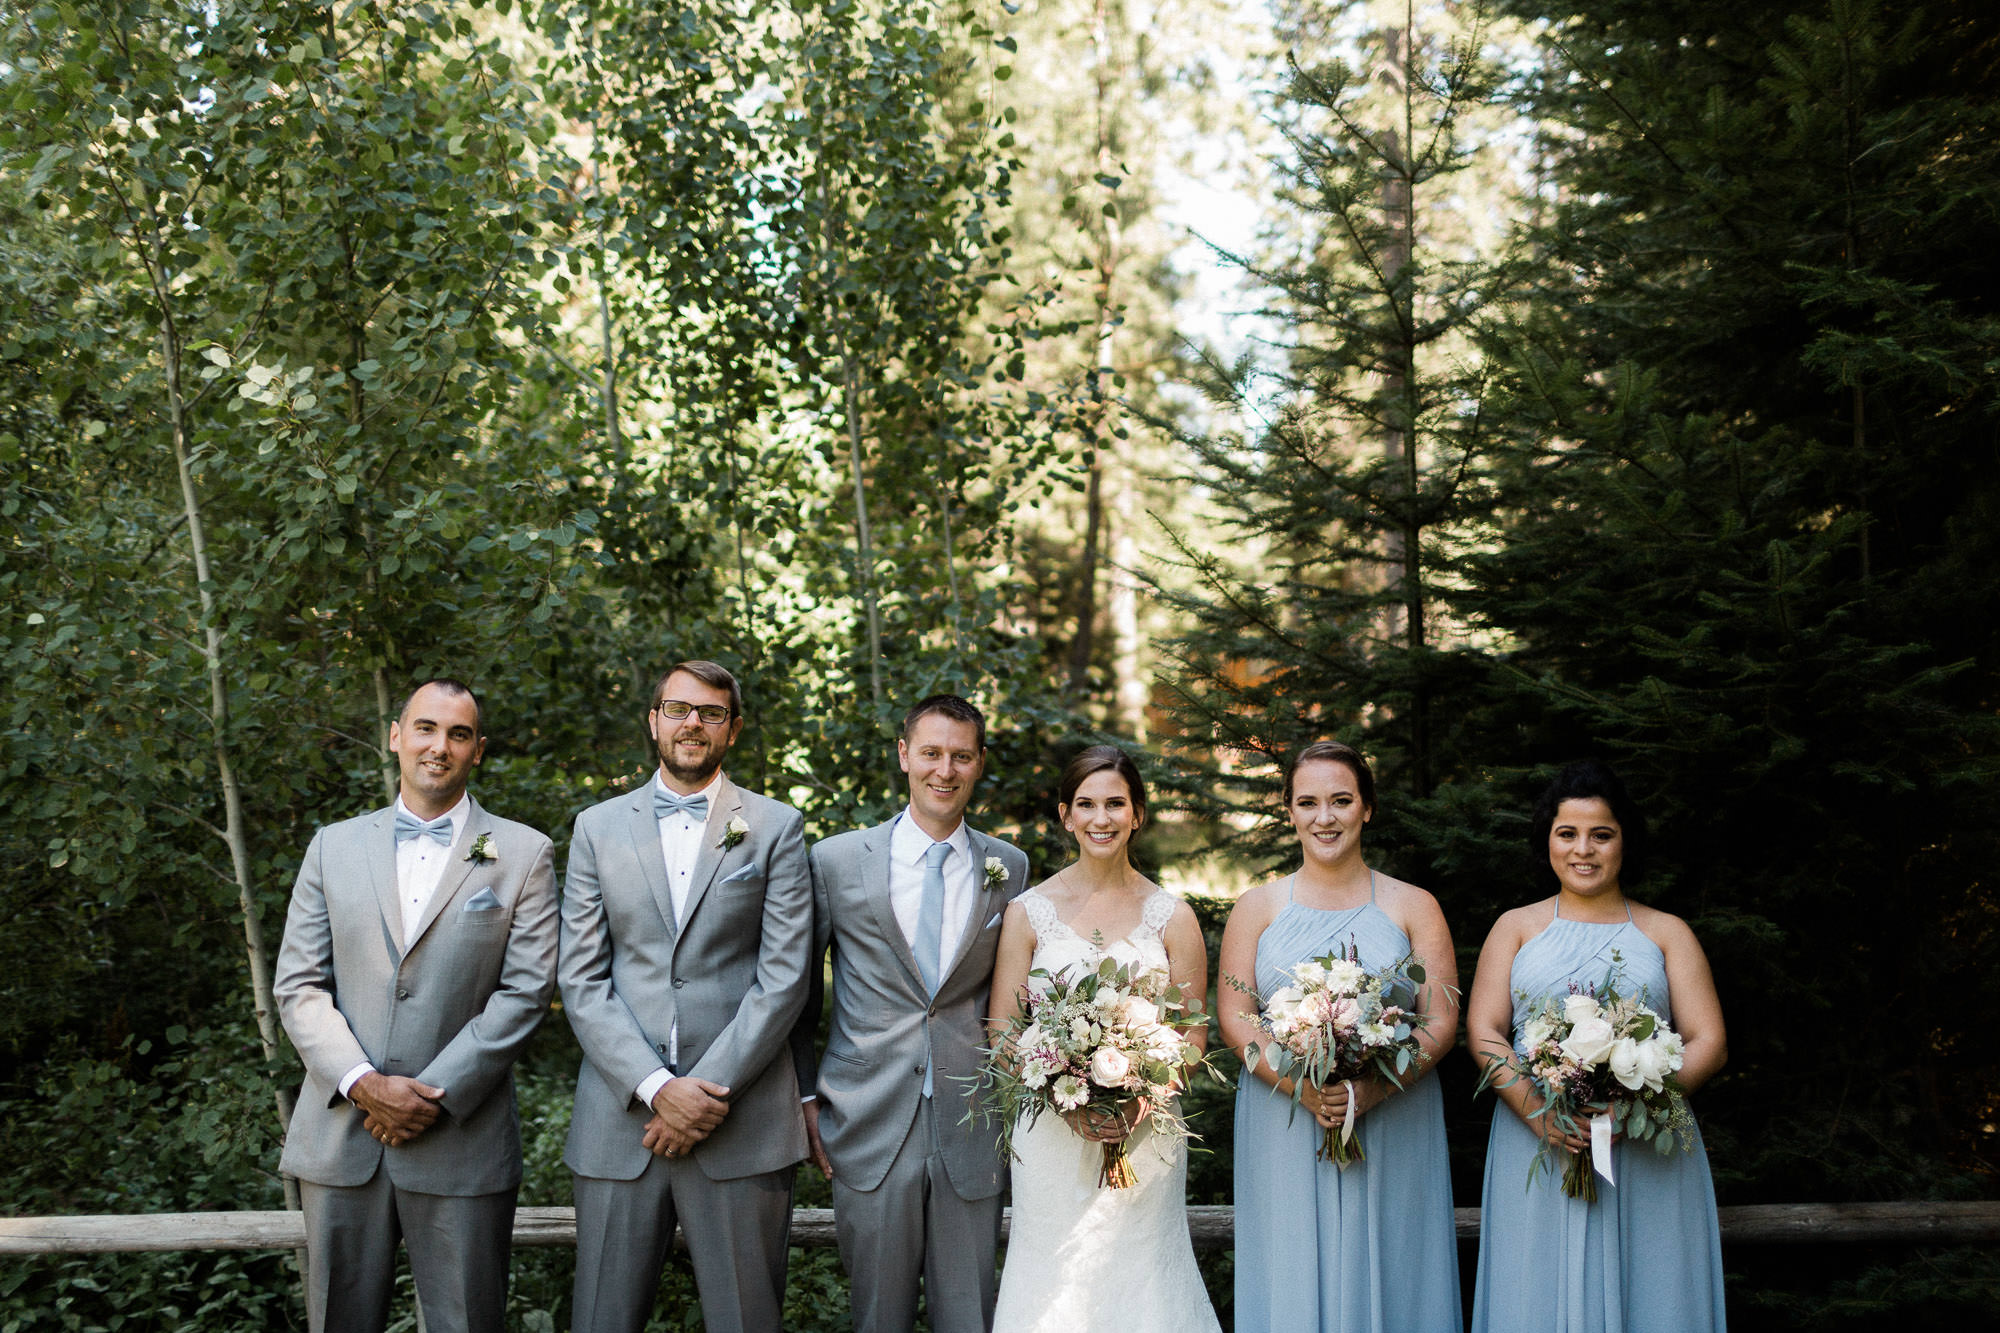 The wedding party poses in front of trees at Black Butte Ranch in Oregon